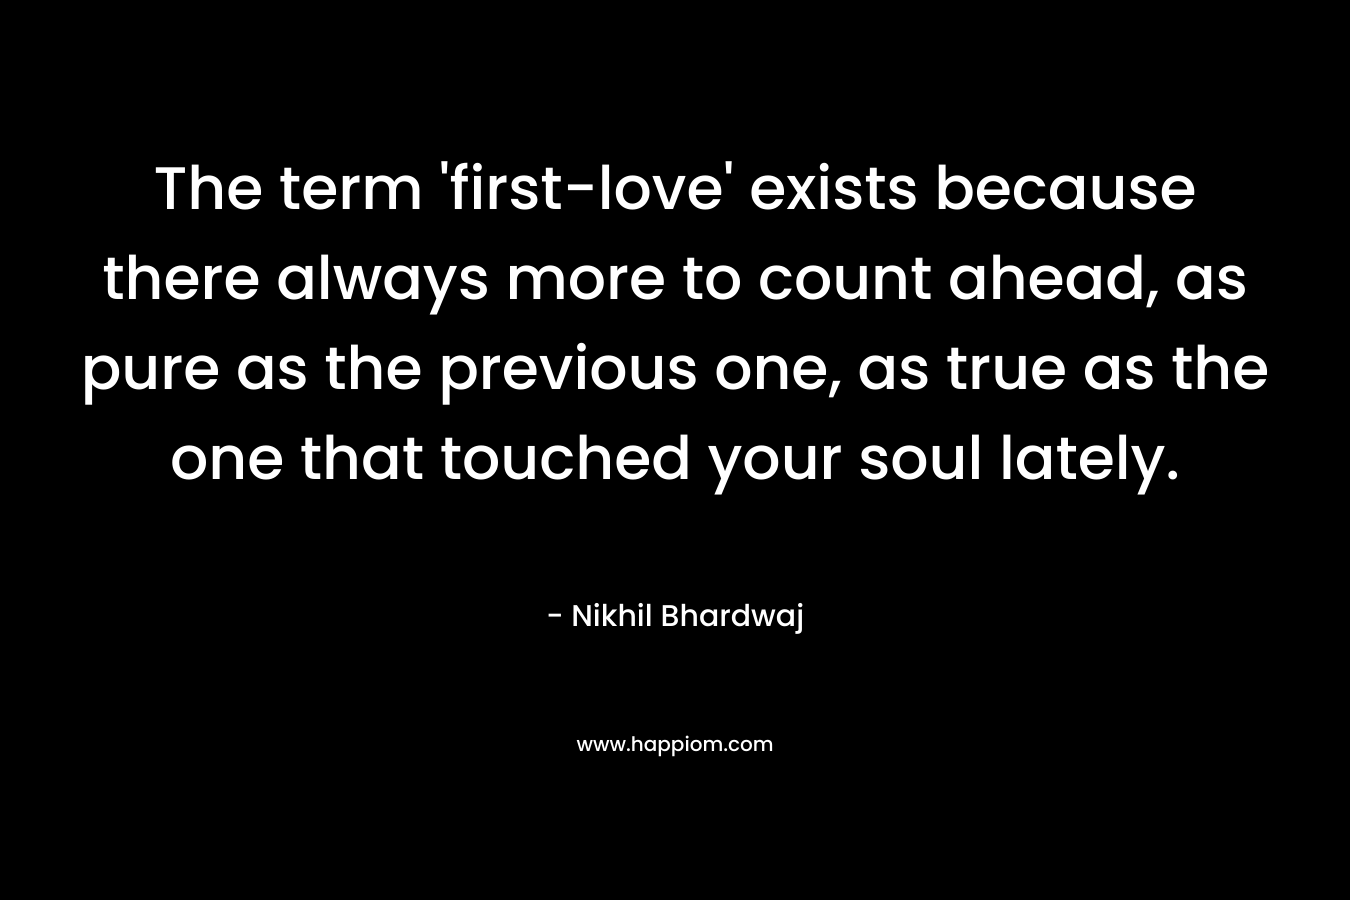 The term 'first-love' exists because there always more to count ahead, as pure as the previous one, as true as the one that touched your soul lately.